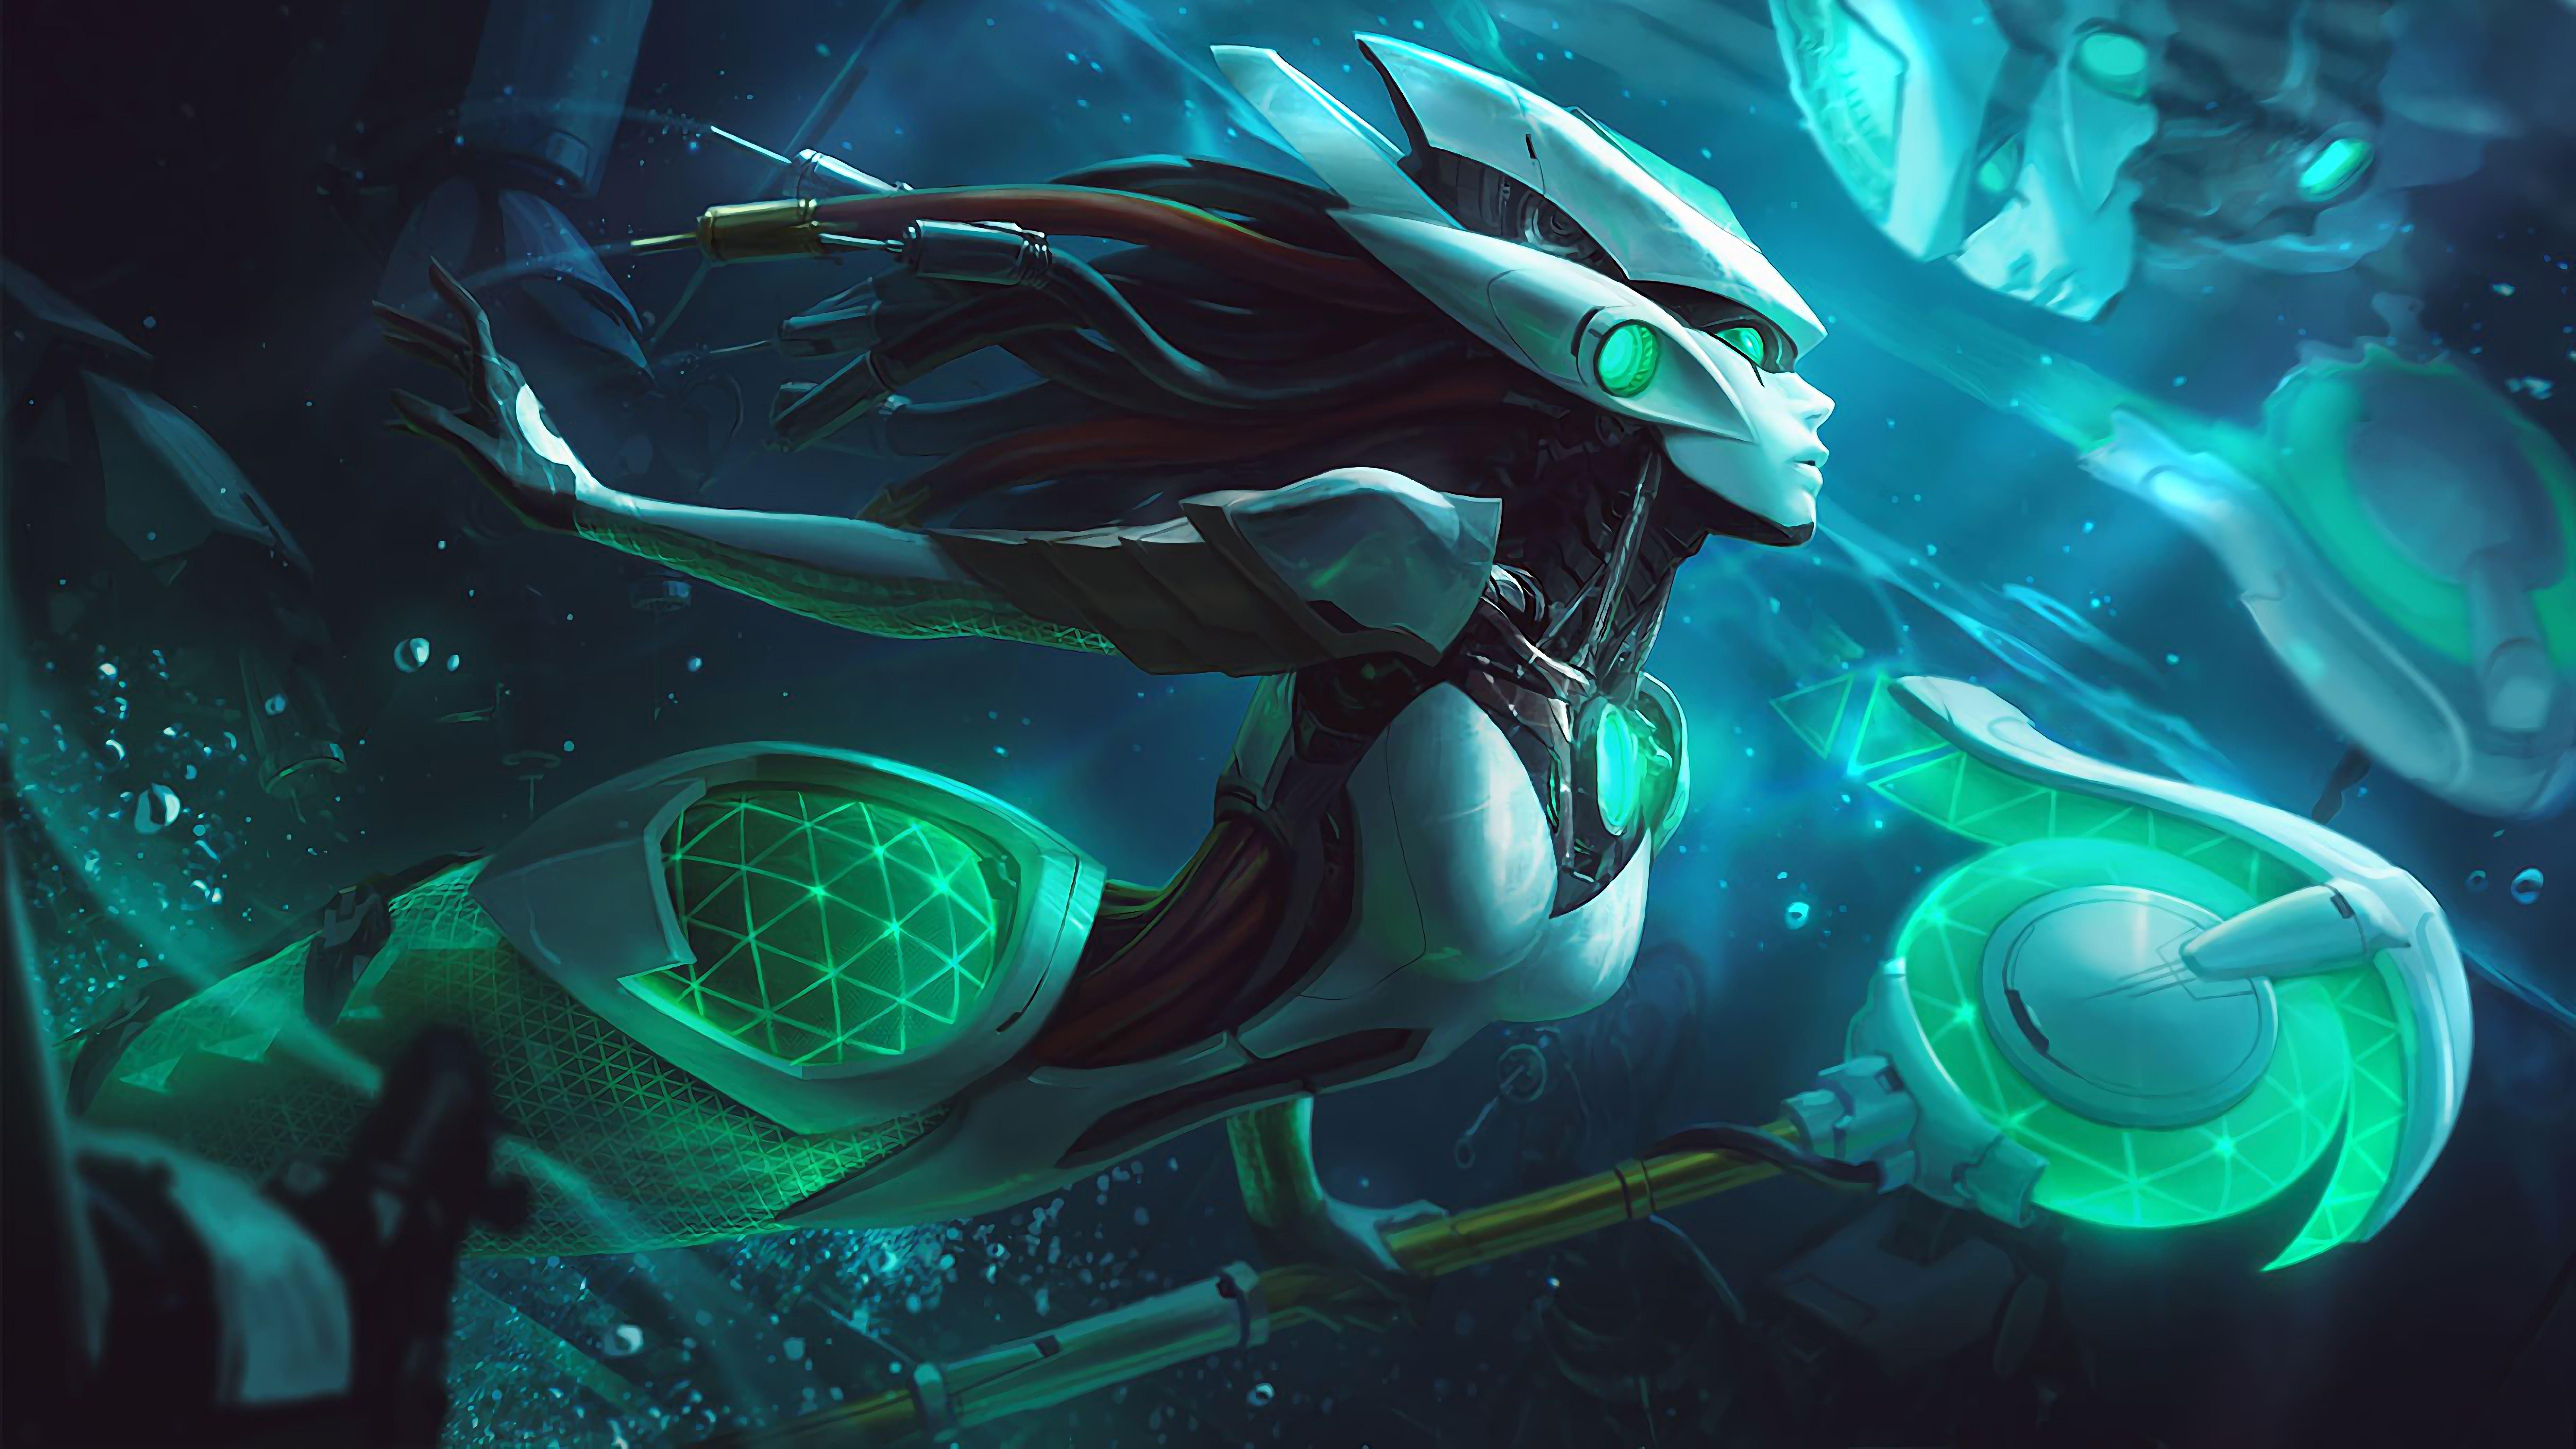 Nami League of Legends Wallpapers - Top Free Nami League of Legends  Backgrounds - WallpaperAccess